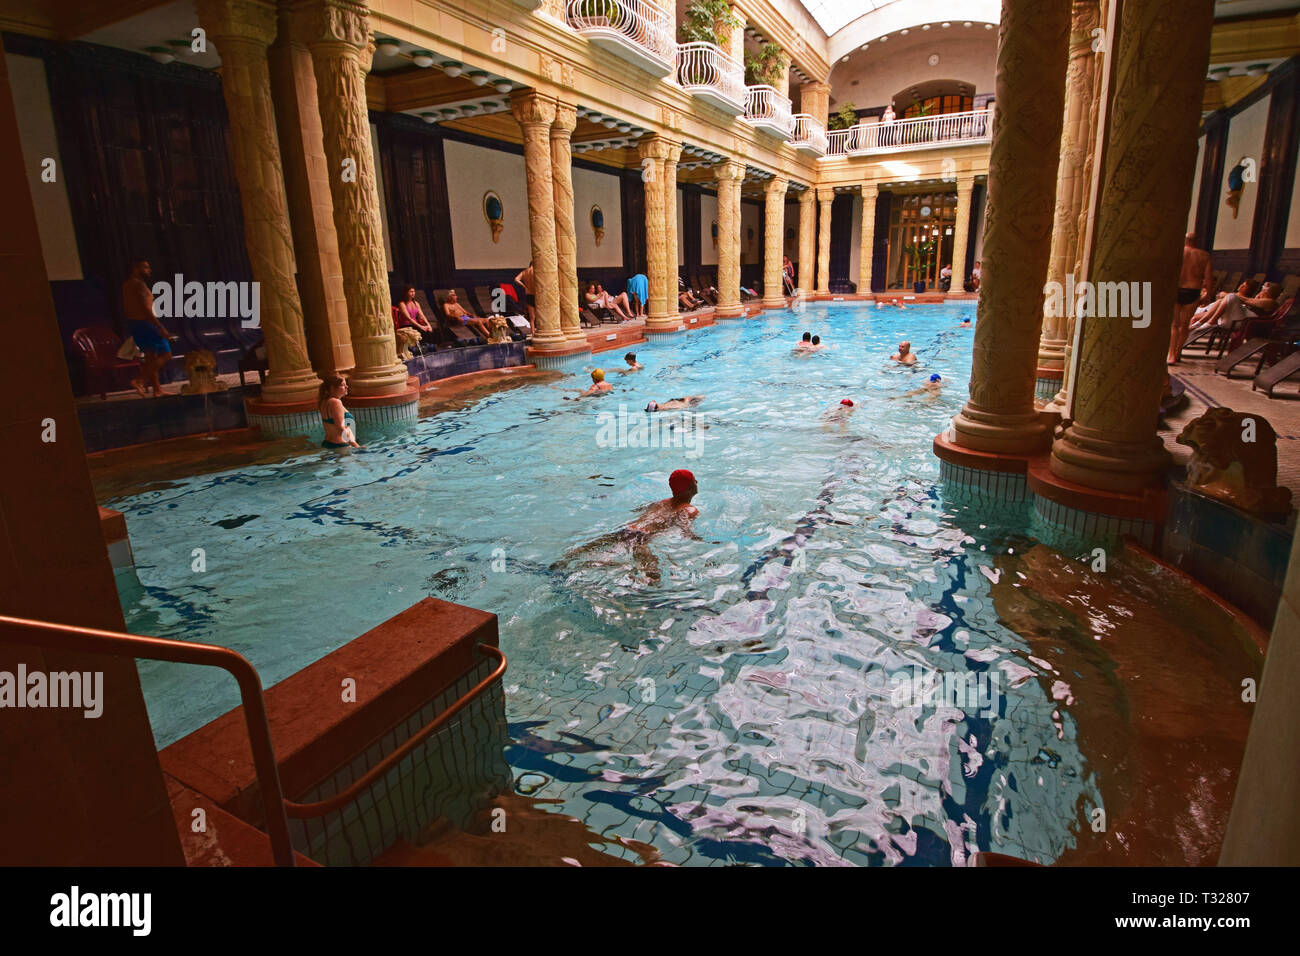 Gellert Thermal Baths and Swimming Pool (also known as the Gellért Baths or in Hungarian as the Gellért gyógyfürd?) is a bath complex in Budapest in H Stock Photo